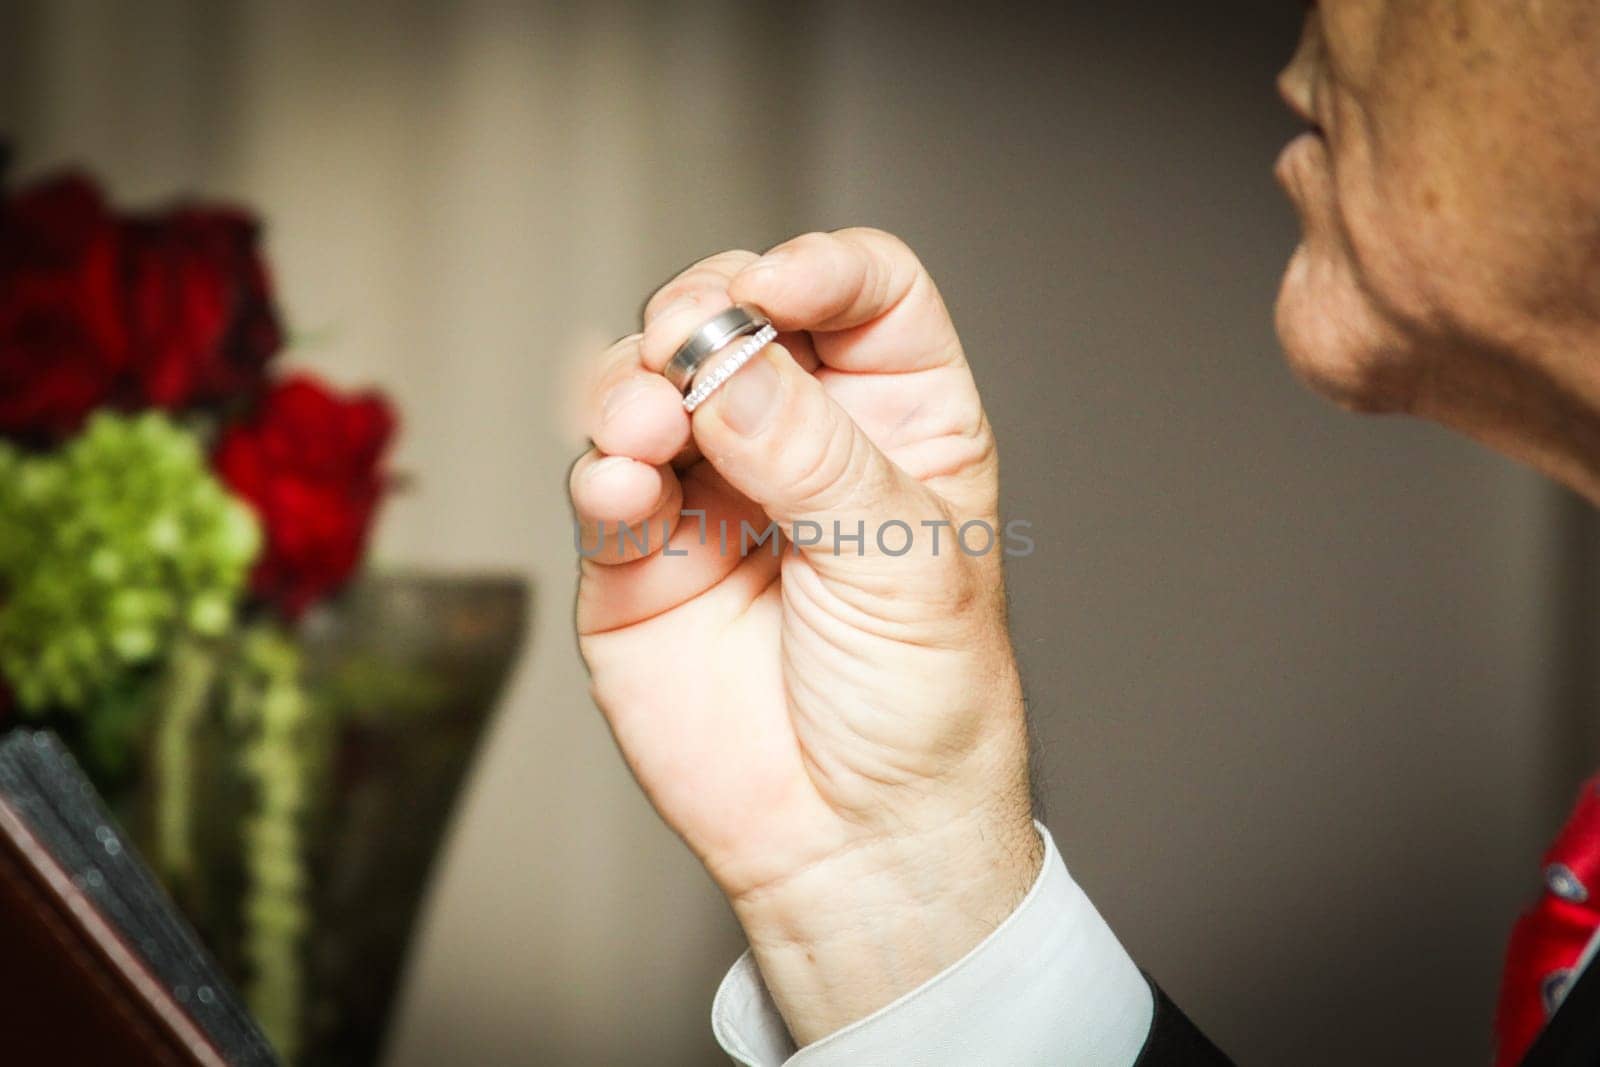 Officient holding wedding rings blessing them